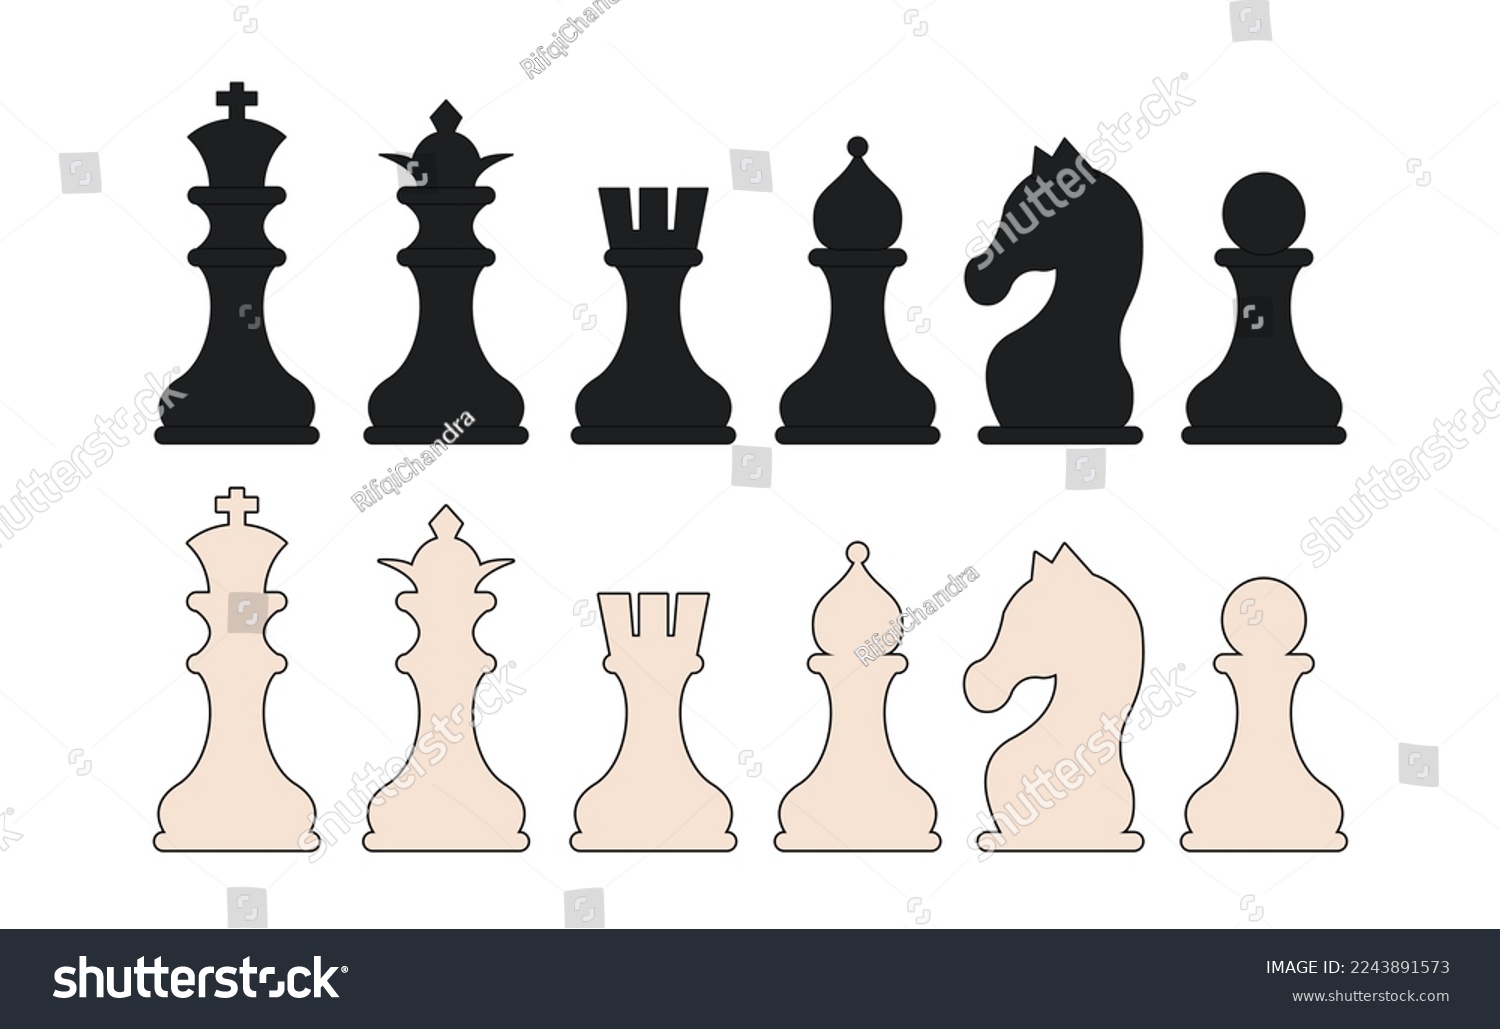 SVG of vector set of a full set of chess pieces on a white background. All standard chess pieces include the king, queen, bishops, knights, rooks, and pawns. Perfect for use in a variety of design projects. svg